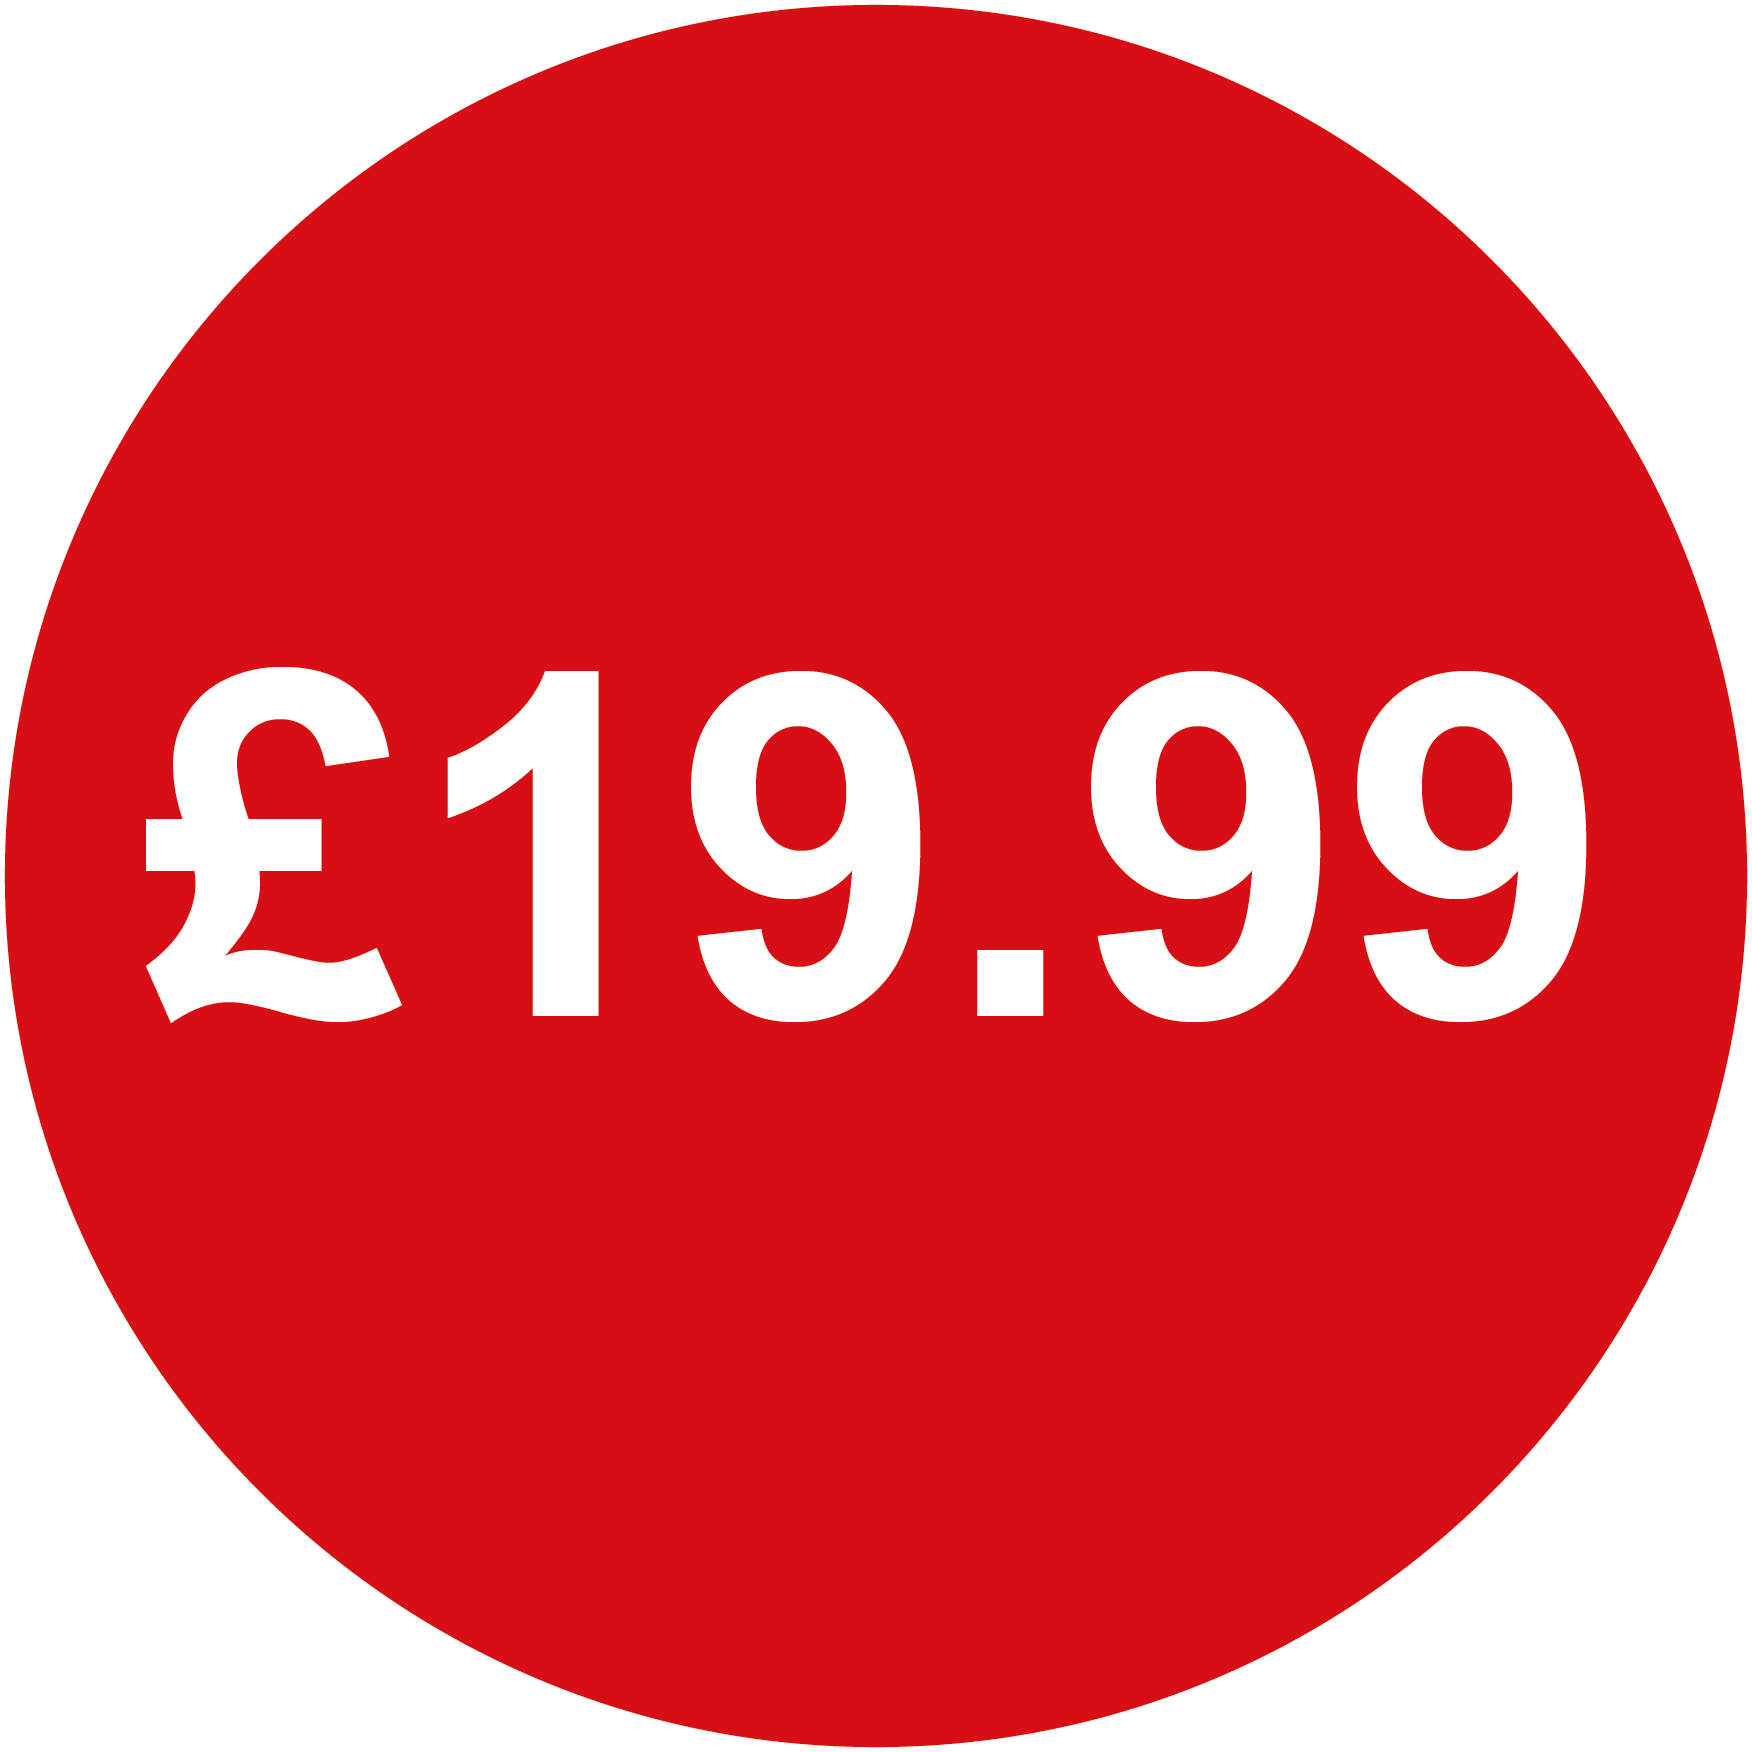 Red £19.99 Round Price Labels